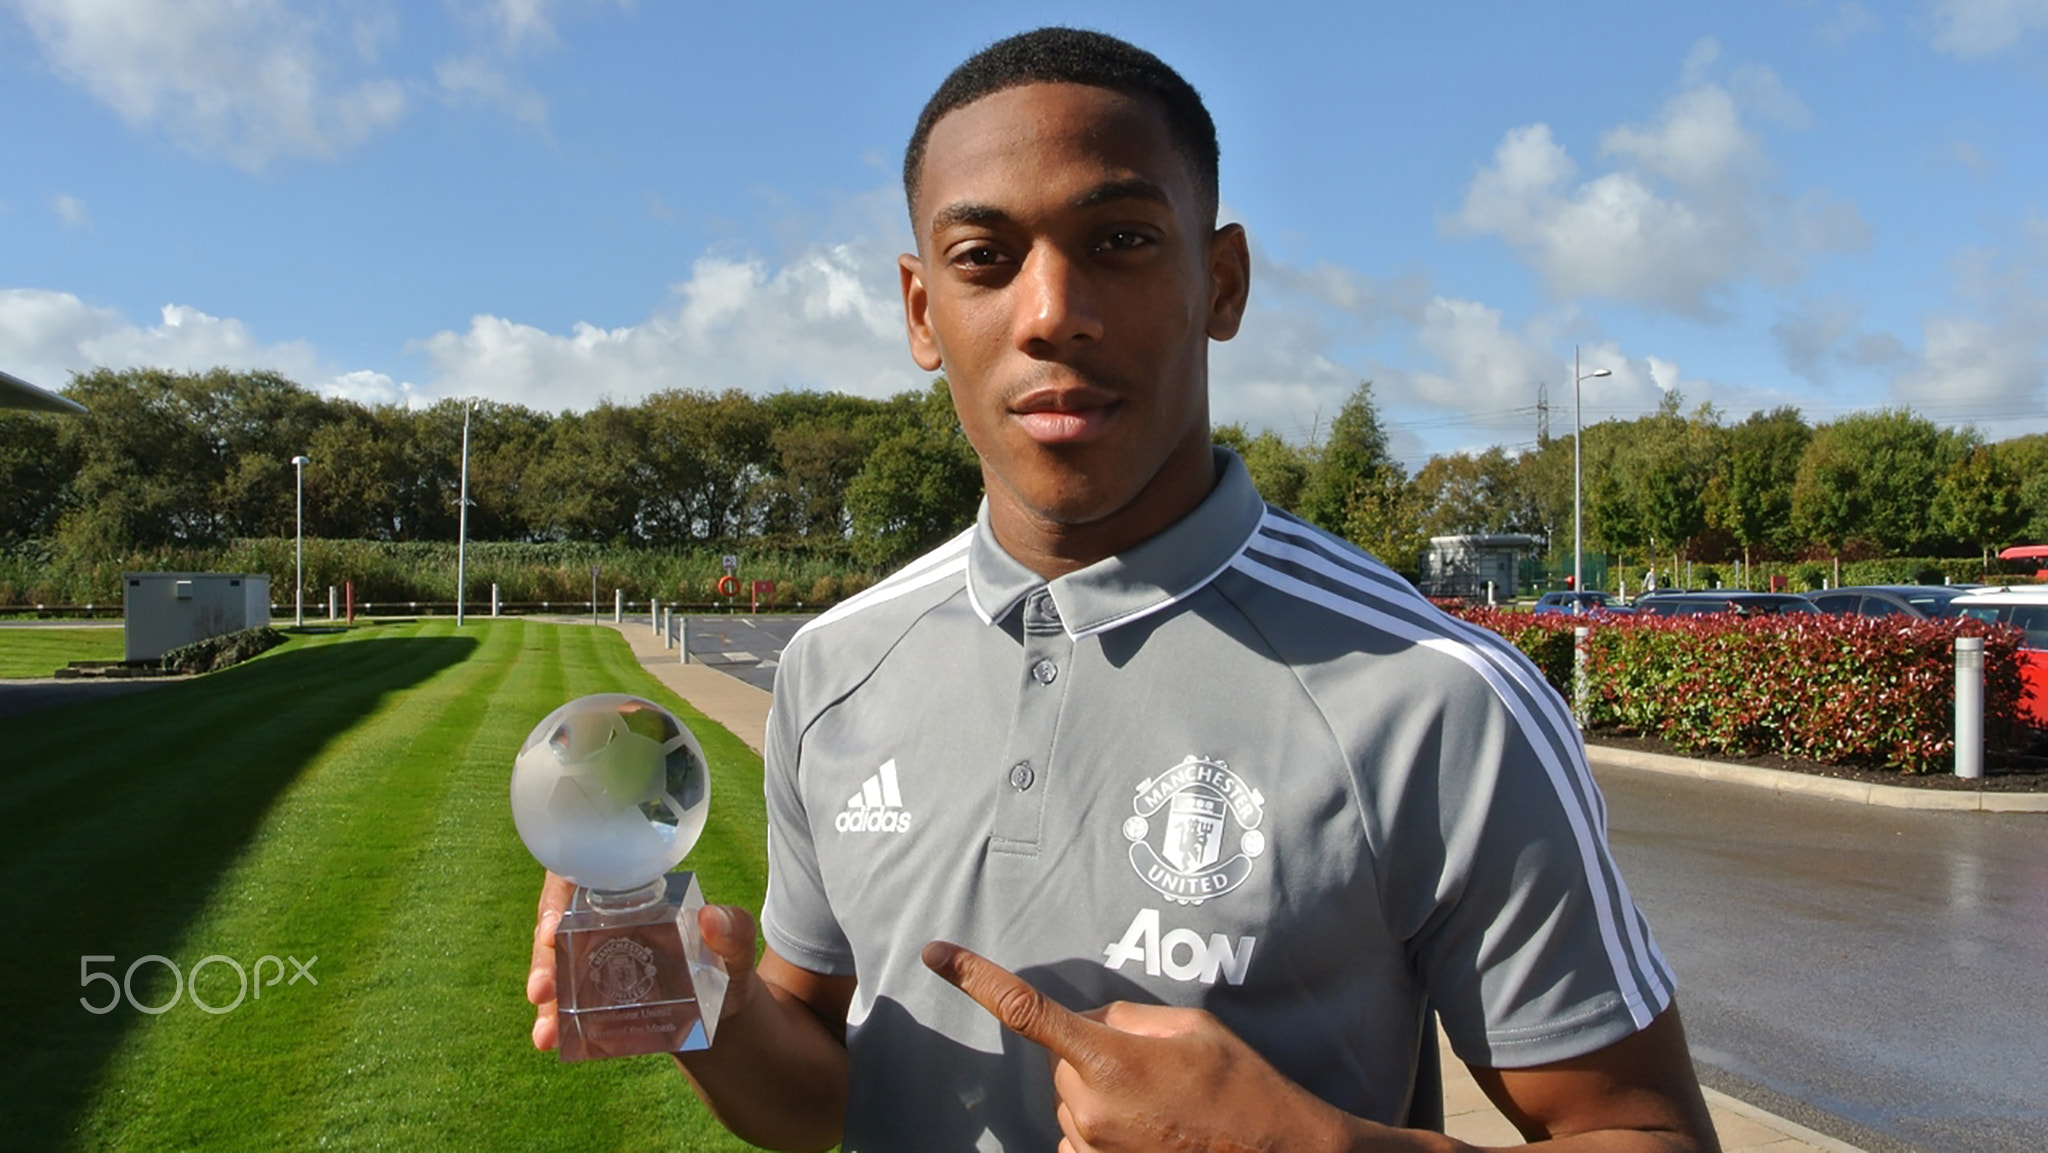 MARTIAL IS SEPTEMBER'S PLAYER OF THE MONTH